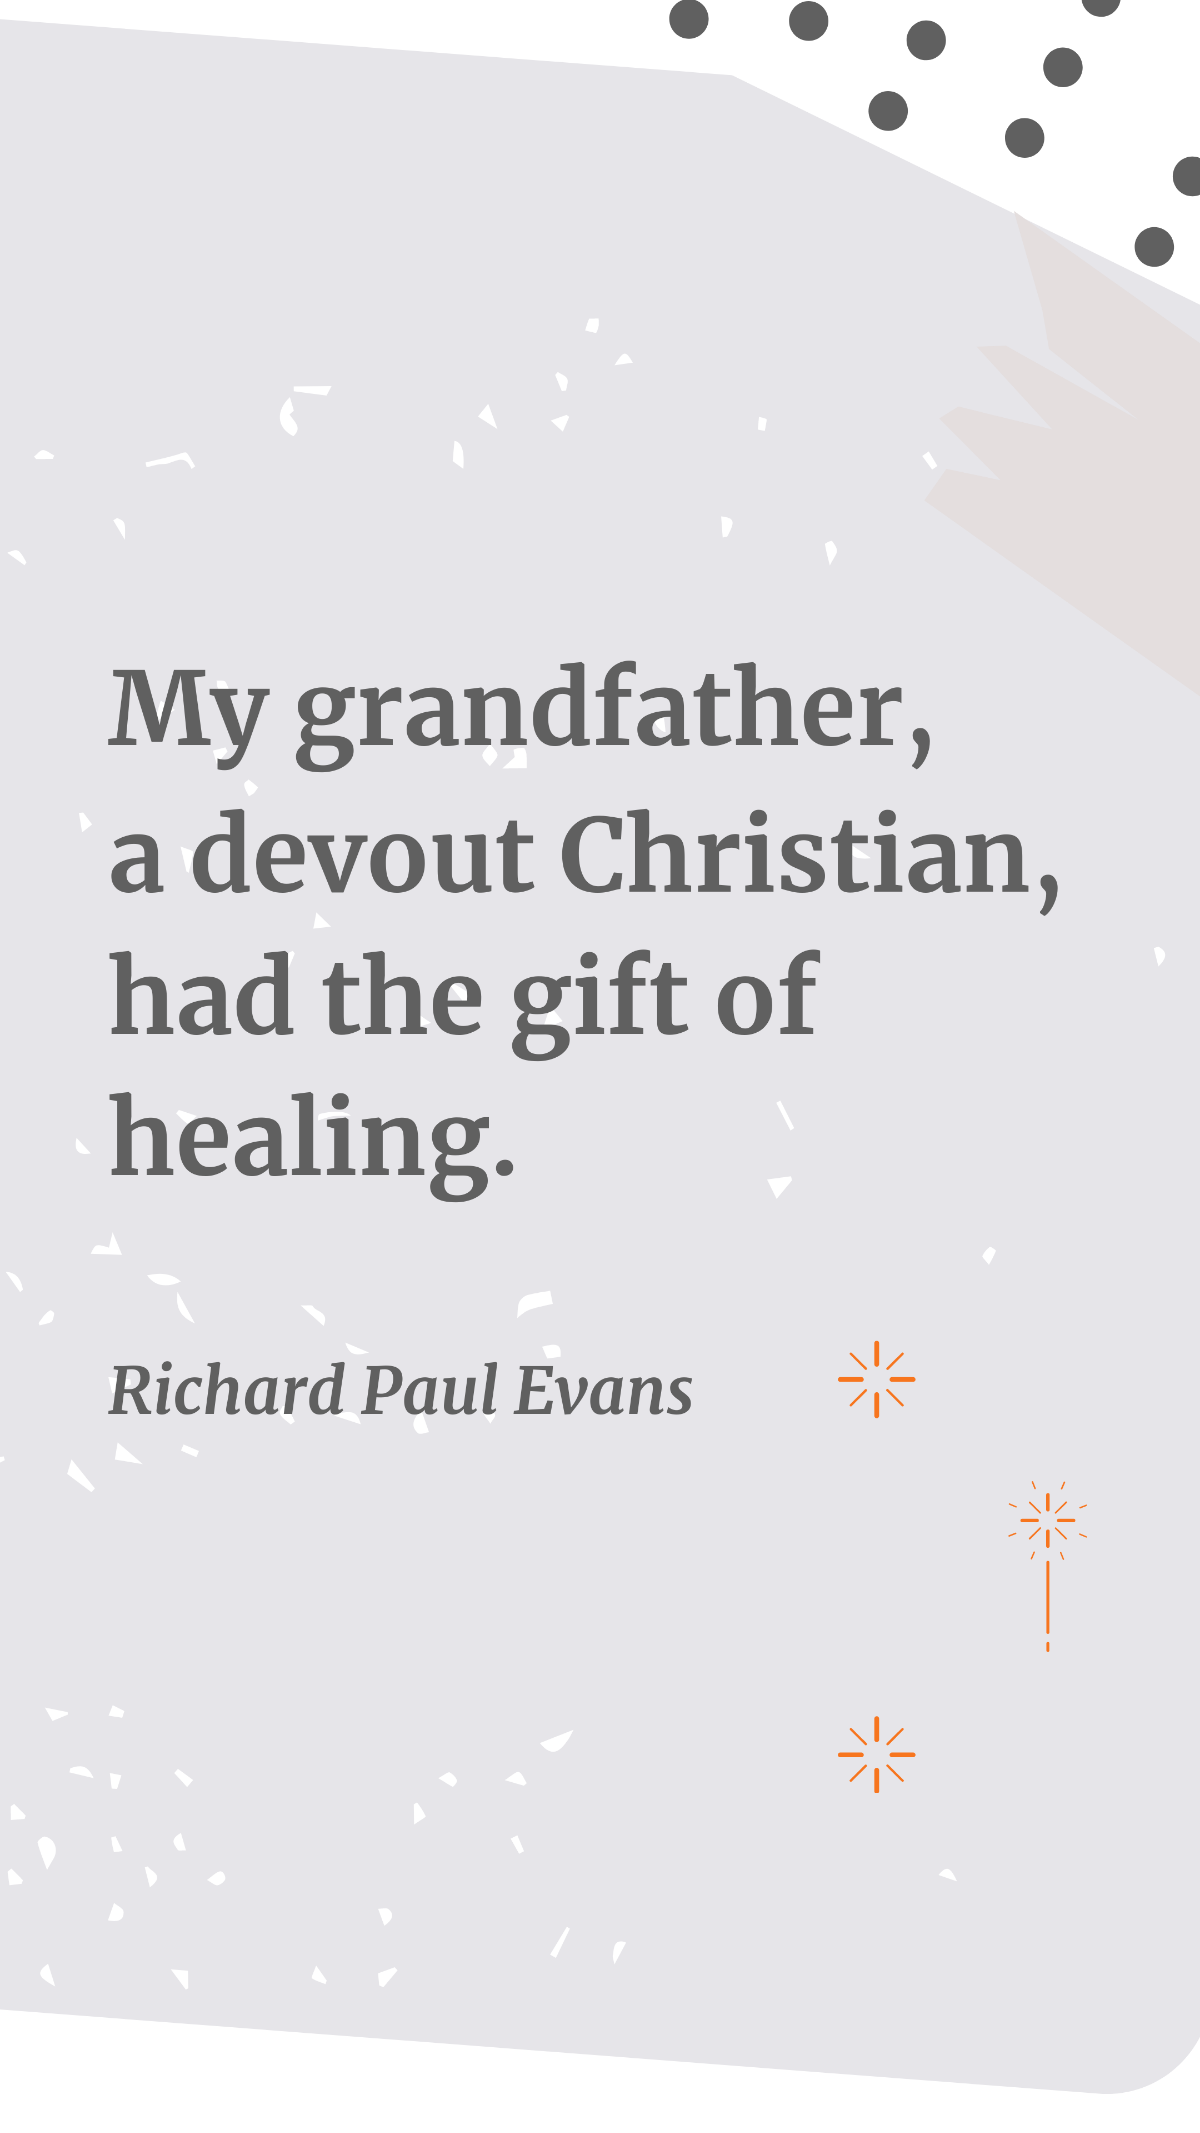 Richard Paul Evans - My grandfather, a devout Christian, had the gift of healing.